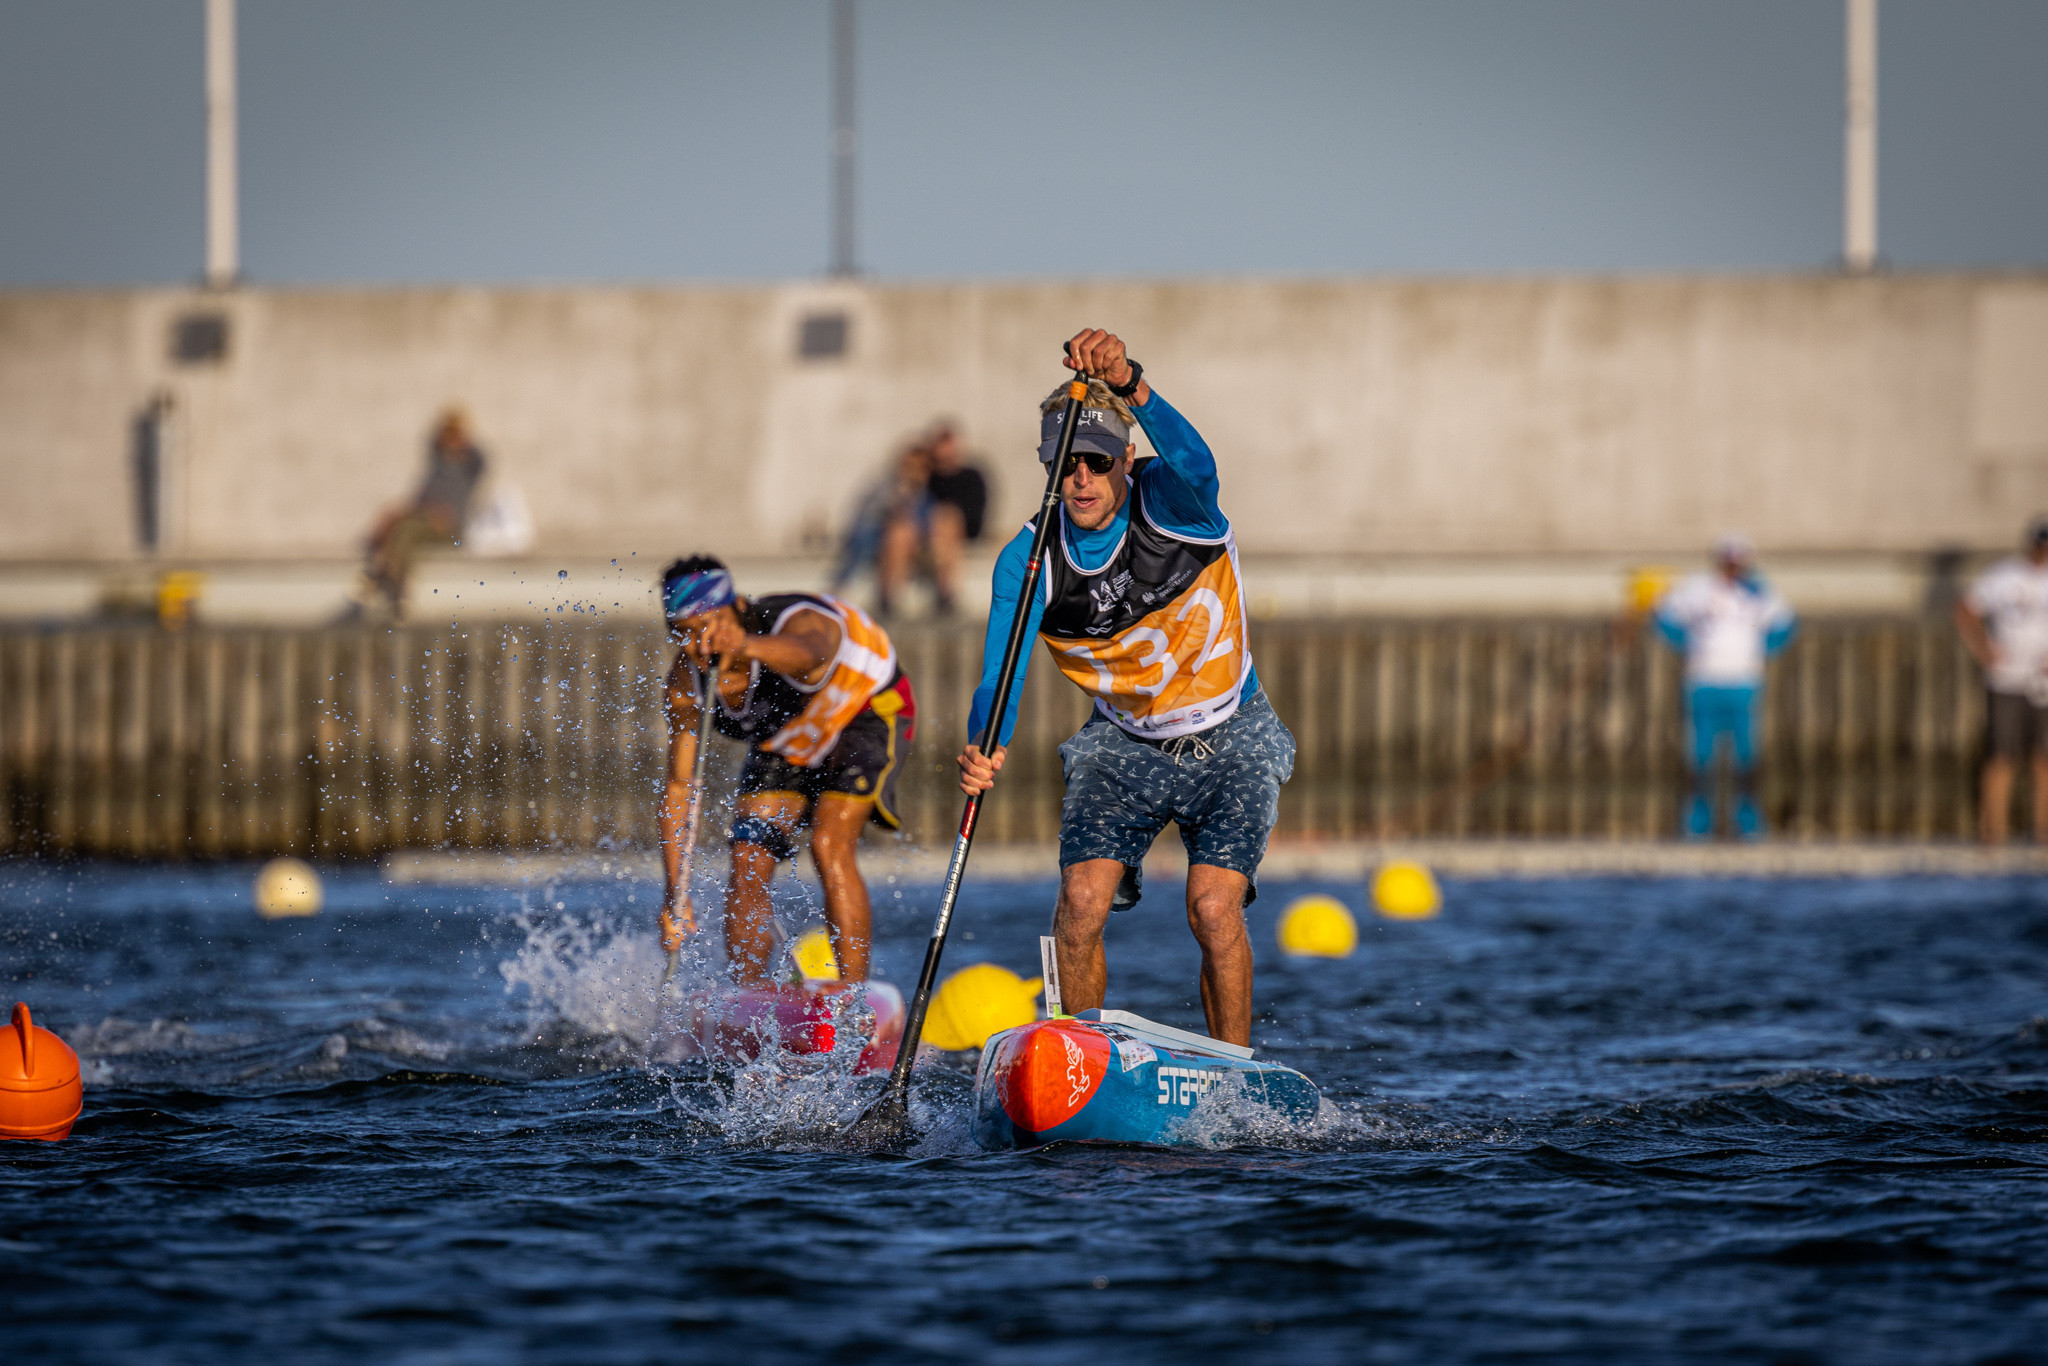 The 2023 ICF Stand Up Paddling World Championships will hope to build upon last year's successful event in Polish city Gdynia ©ICF